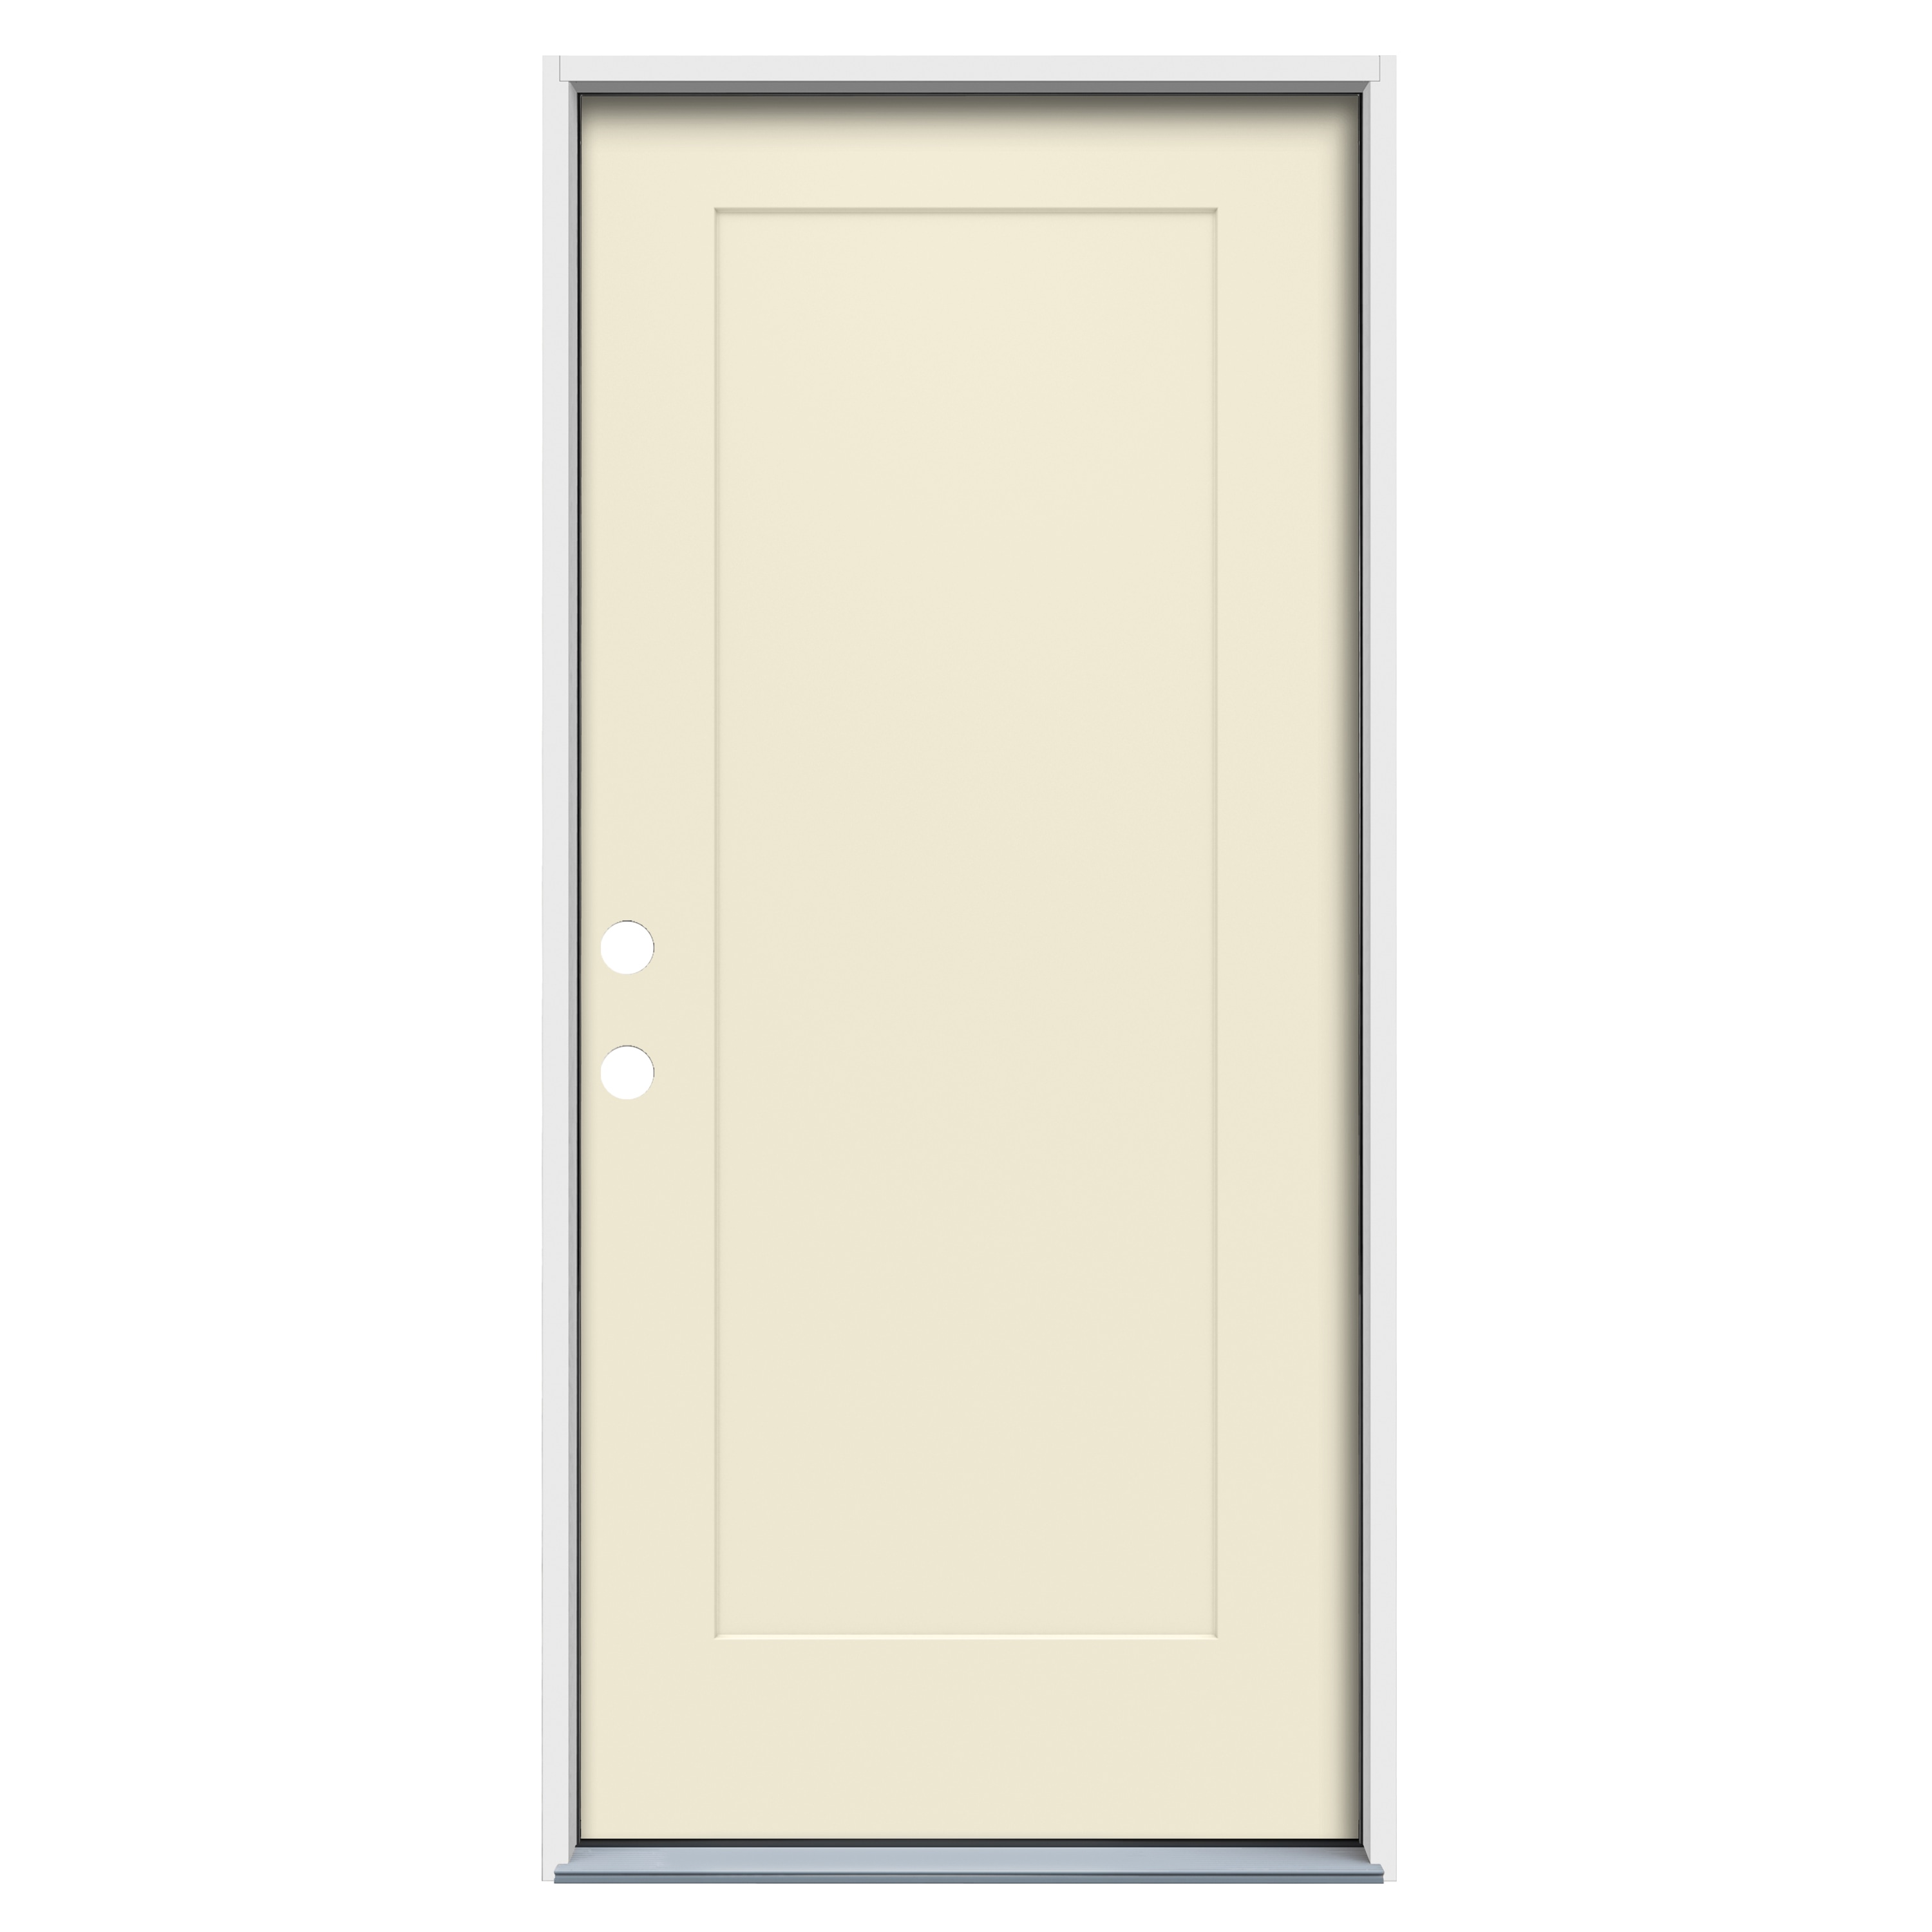 American Building Supply 32-in x 80-in Steel Right-Hand Inswing Bisque Paint Painted Prehung Single Front Door Insulating Core in Off-White -  LO1049552